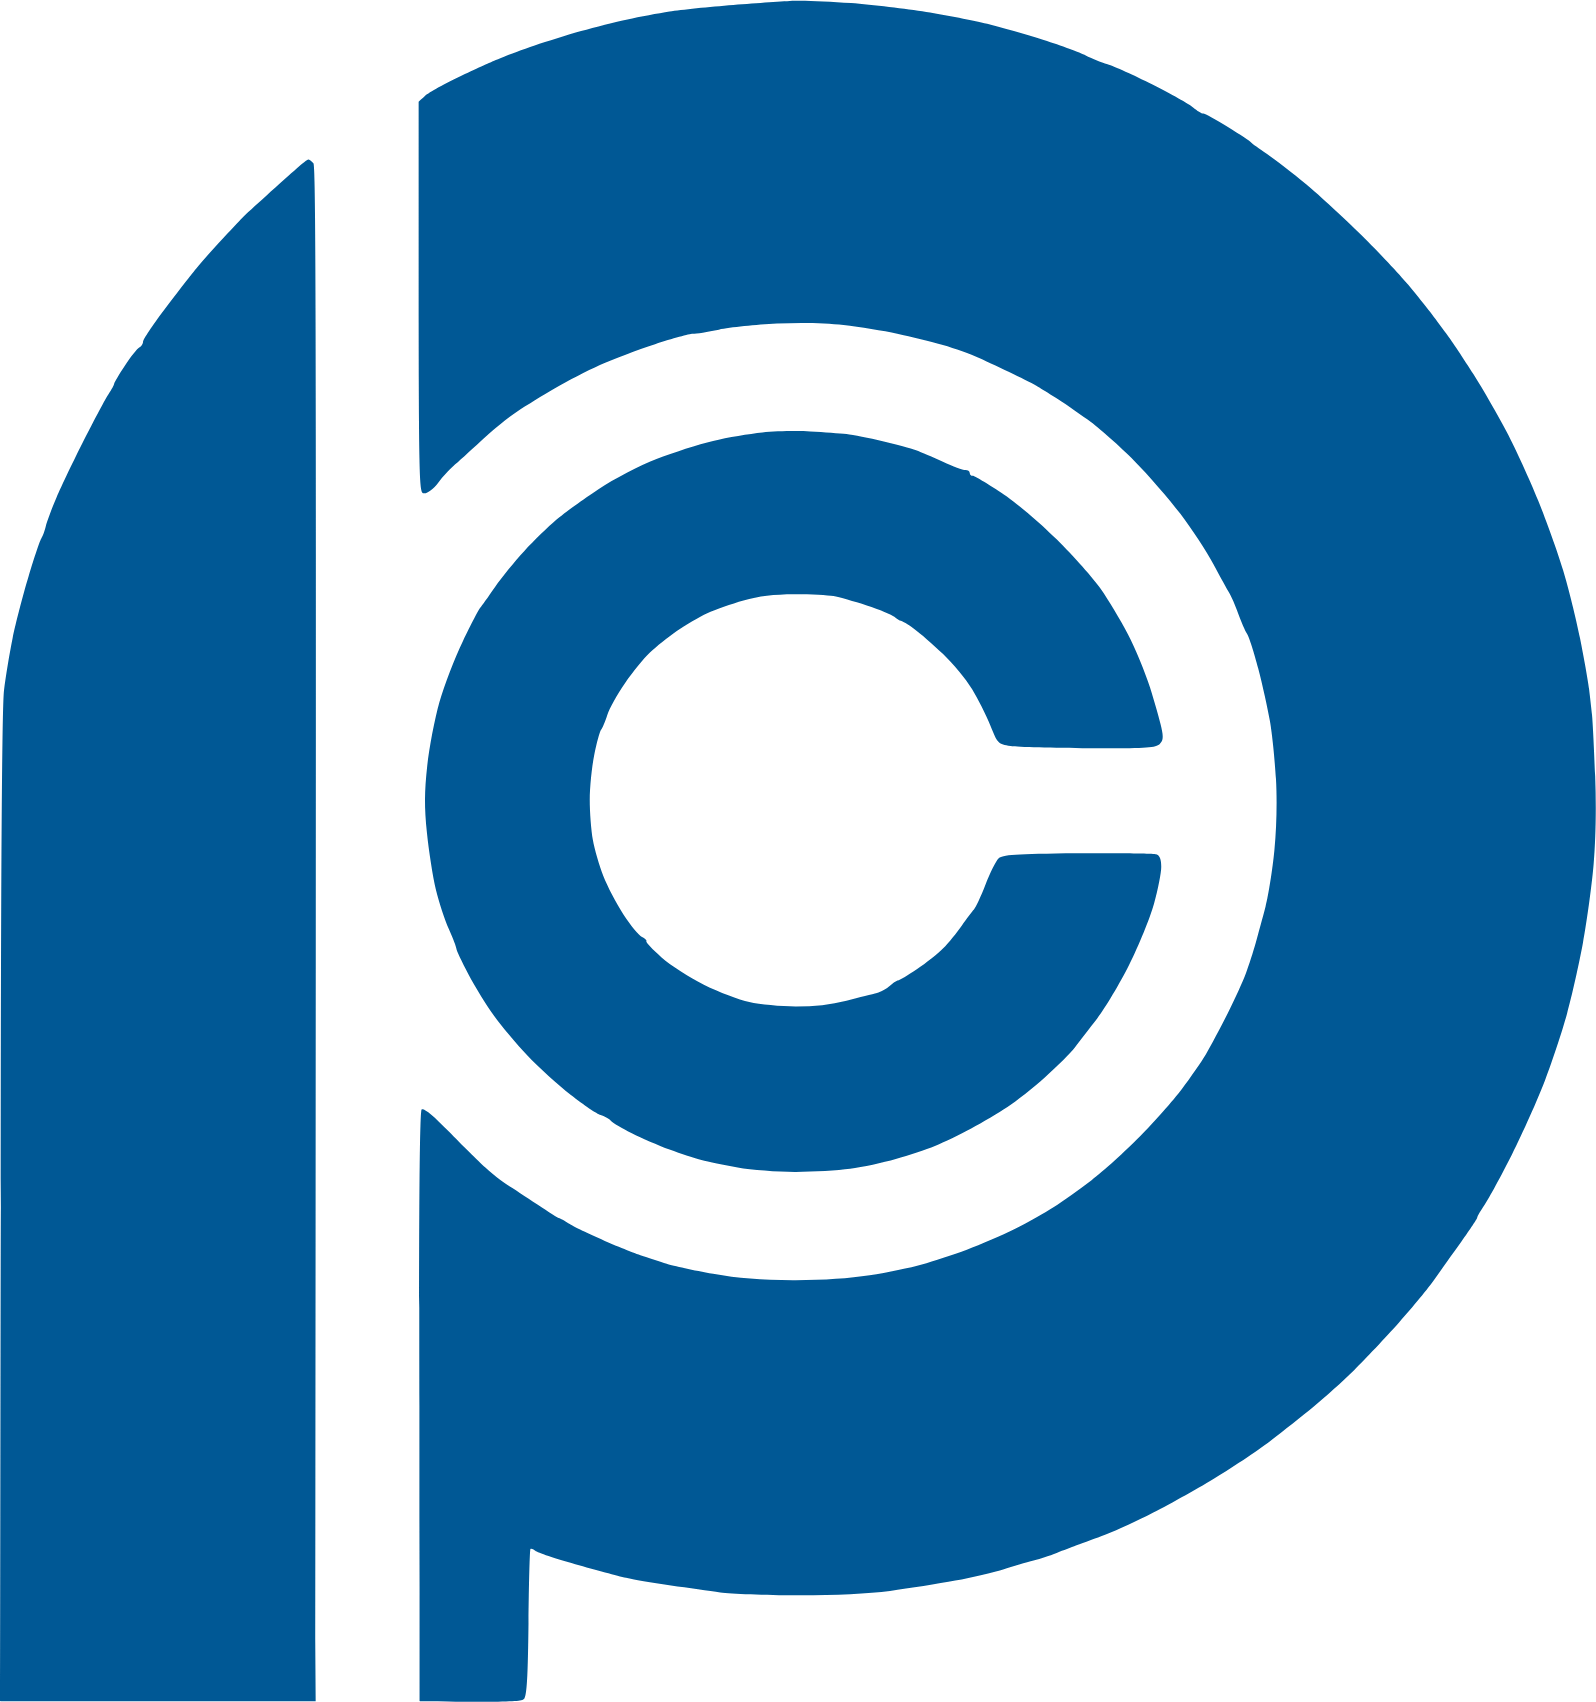 China Pacific Insurance logo (transparent PNG)